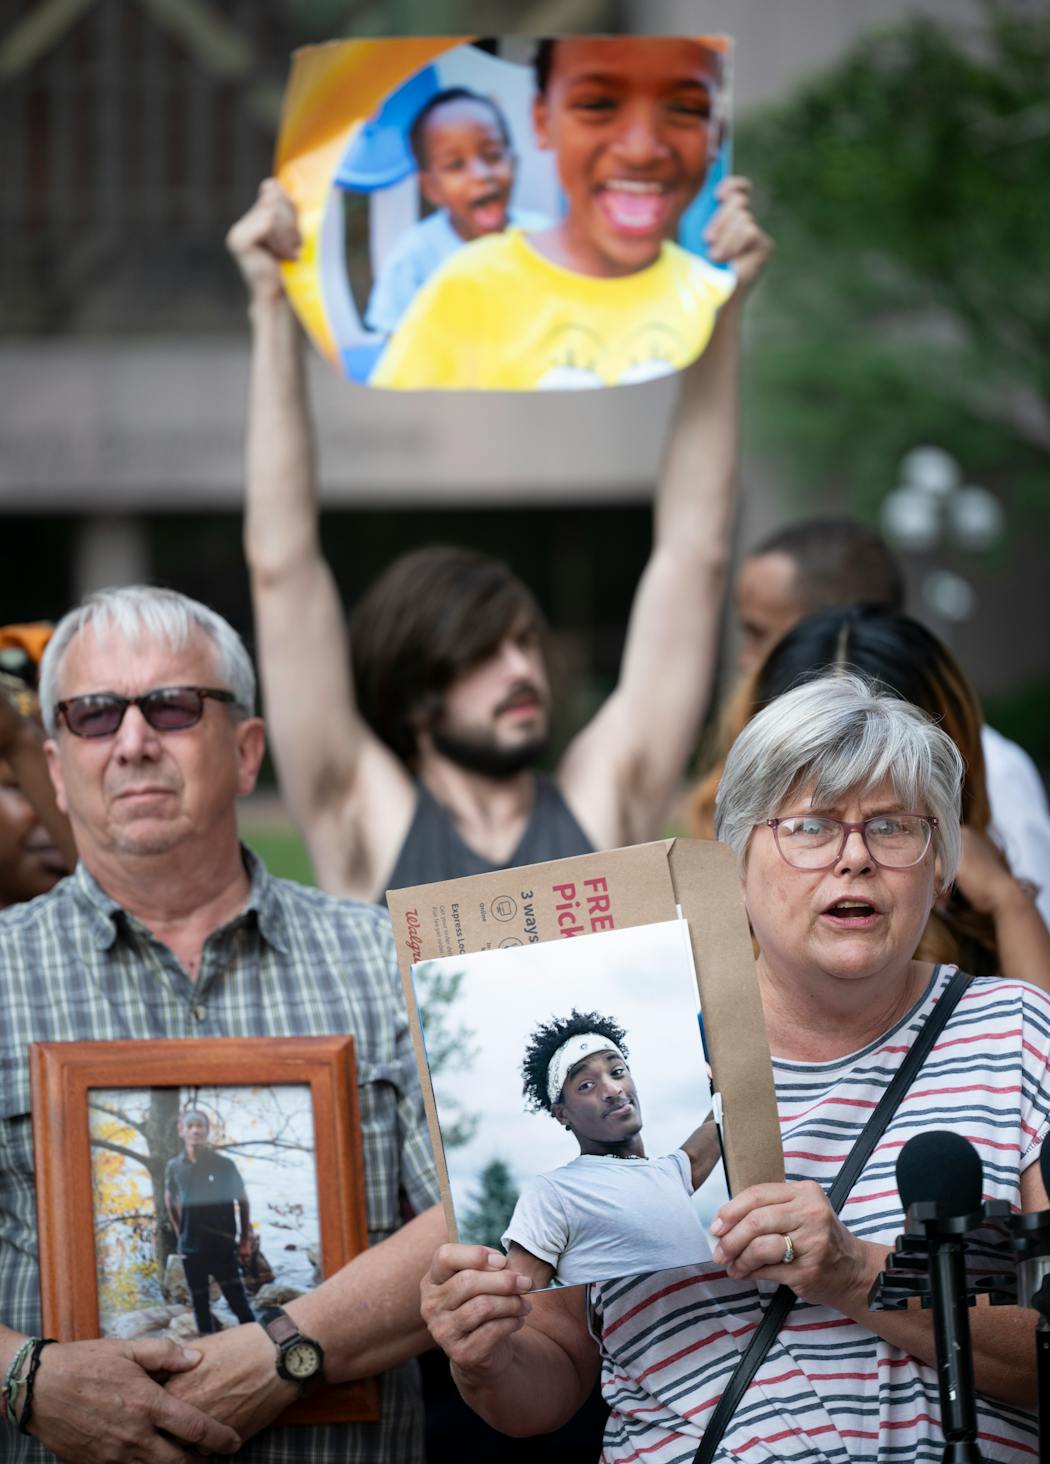 Cindy and Mark Sundberg, whose son, Tekle Sundberg, was shot and killed by Minneapolis police during a standoff last year, held photos of their son while speaking during a rally outside the Hennepin County Government Center on Friday in Minneapolis.